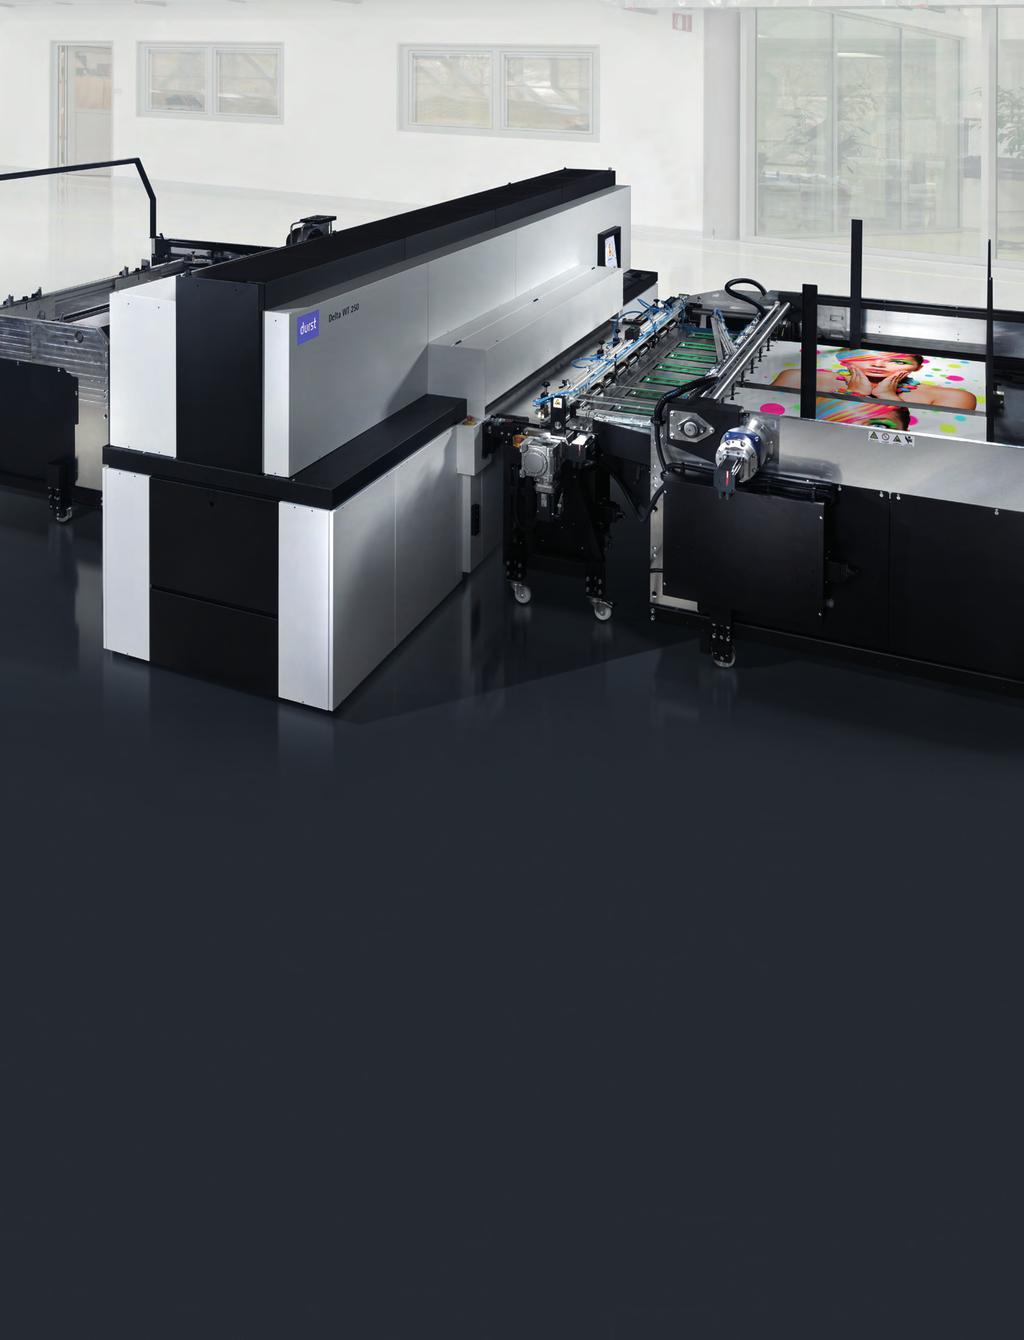 Delta WT 250 The Delta WT 250 represents a new generation of printers incorporating Durst Water Technology. The system prints from flexo quality up to supberb litho quality with odorless ink.